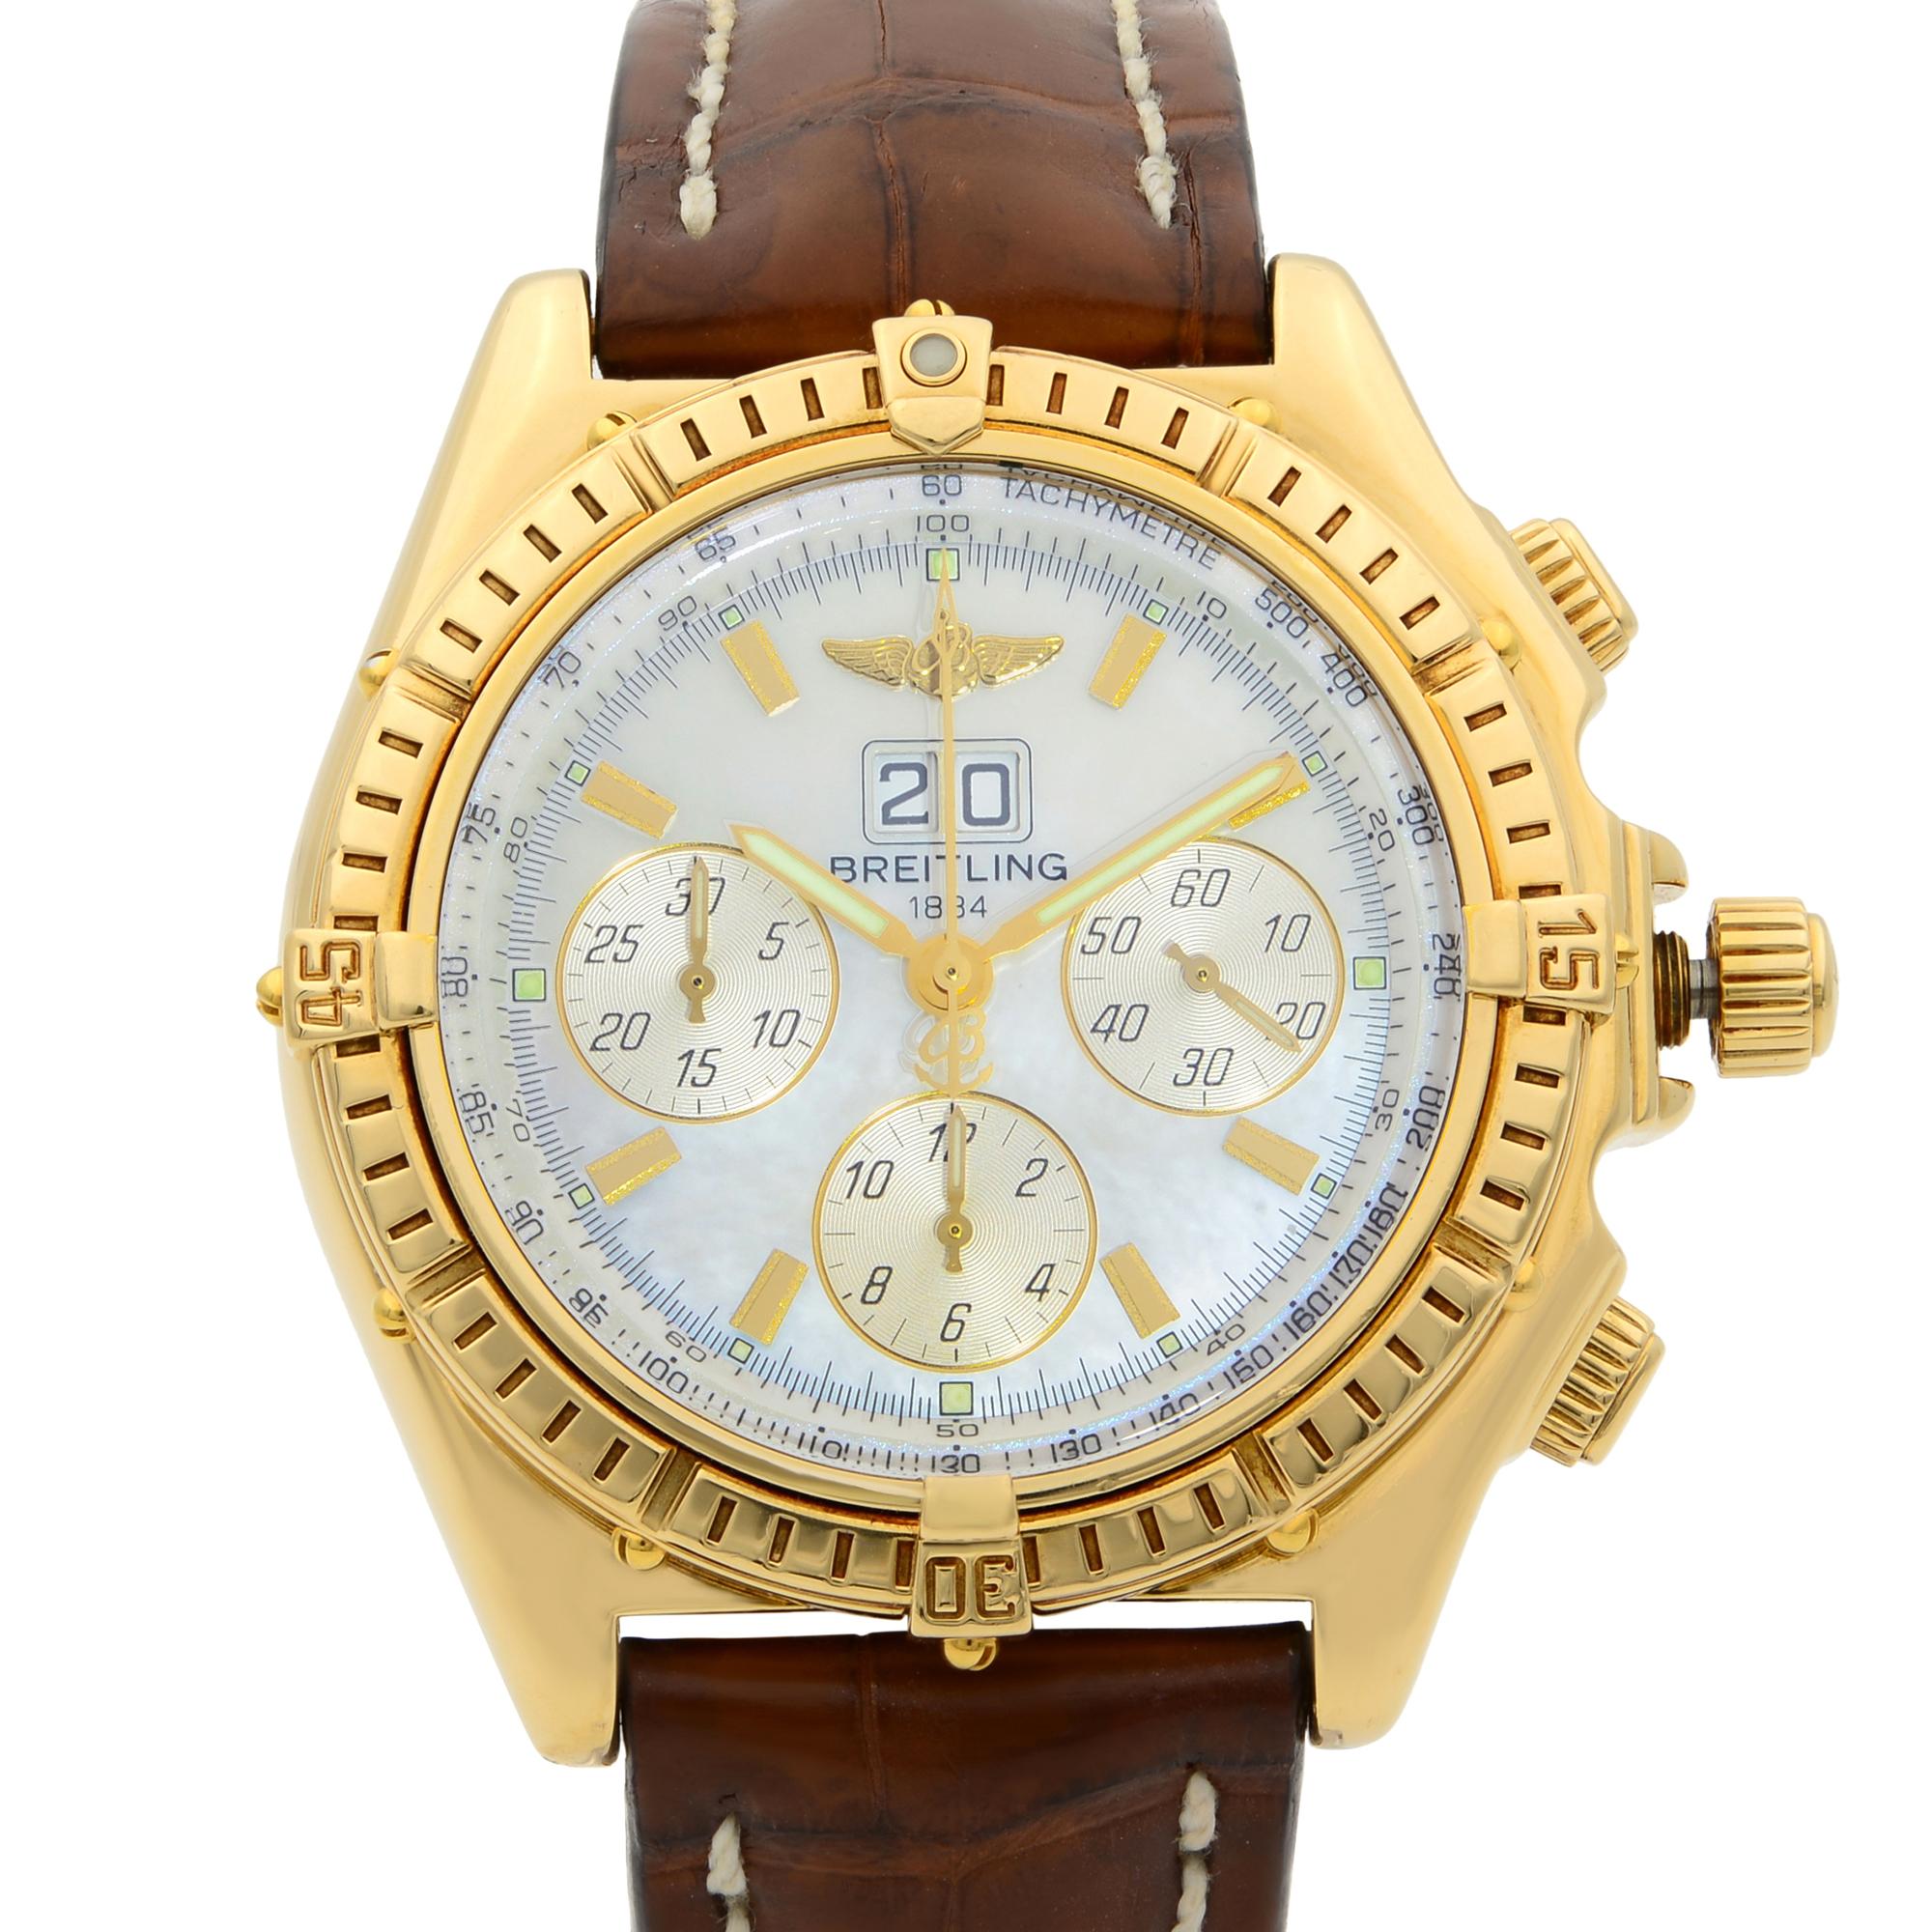 This pre-owned Breitling Crosswind  K44355 is a beautiful men's timepiece that is powered by mechanical (automatic) movement which is cased in a yellow gold case. It has a round shape face, chronograph, date indicator, small seconds subdial dial and